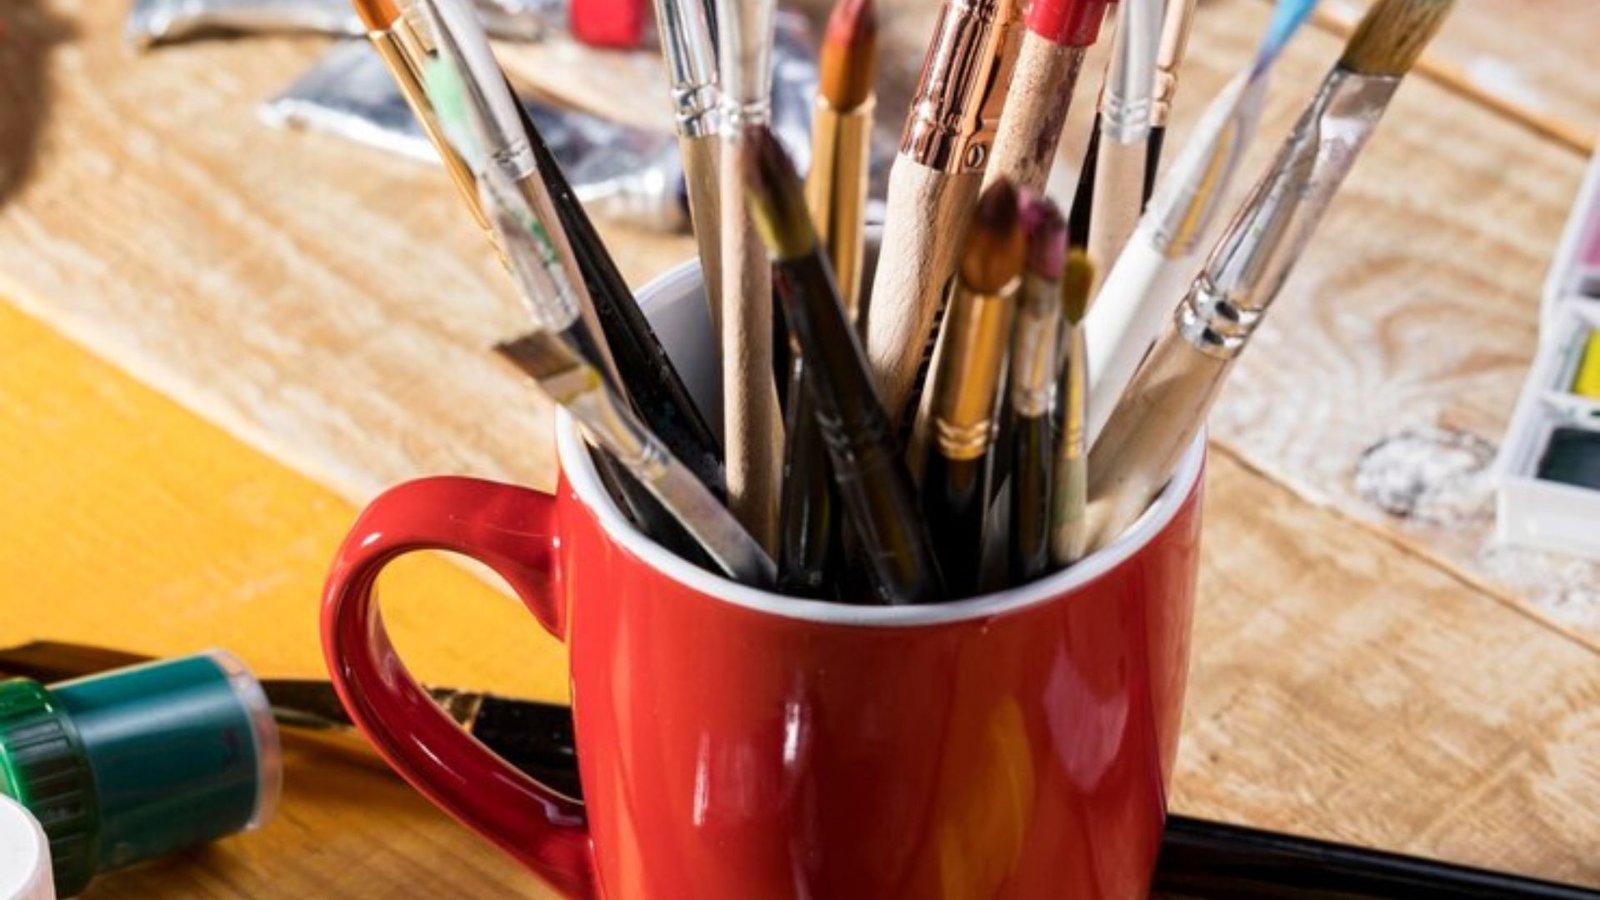 assortment of paint brushes in mug with palette